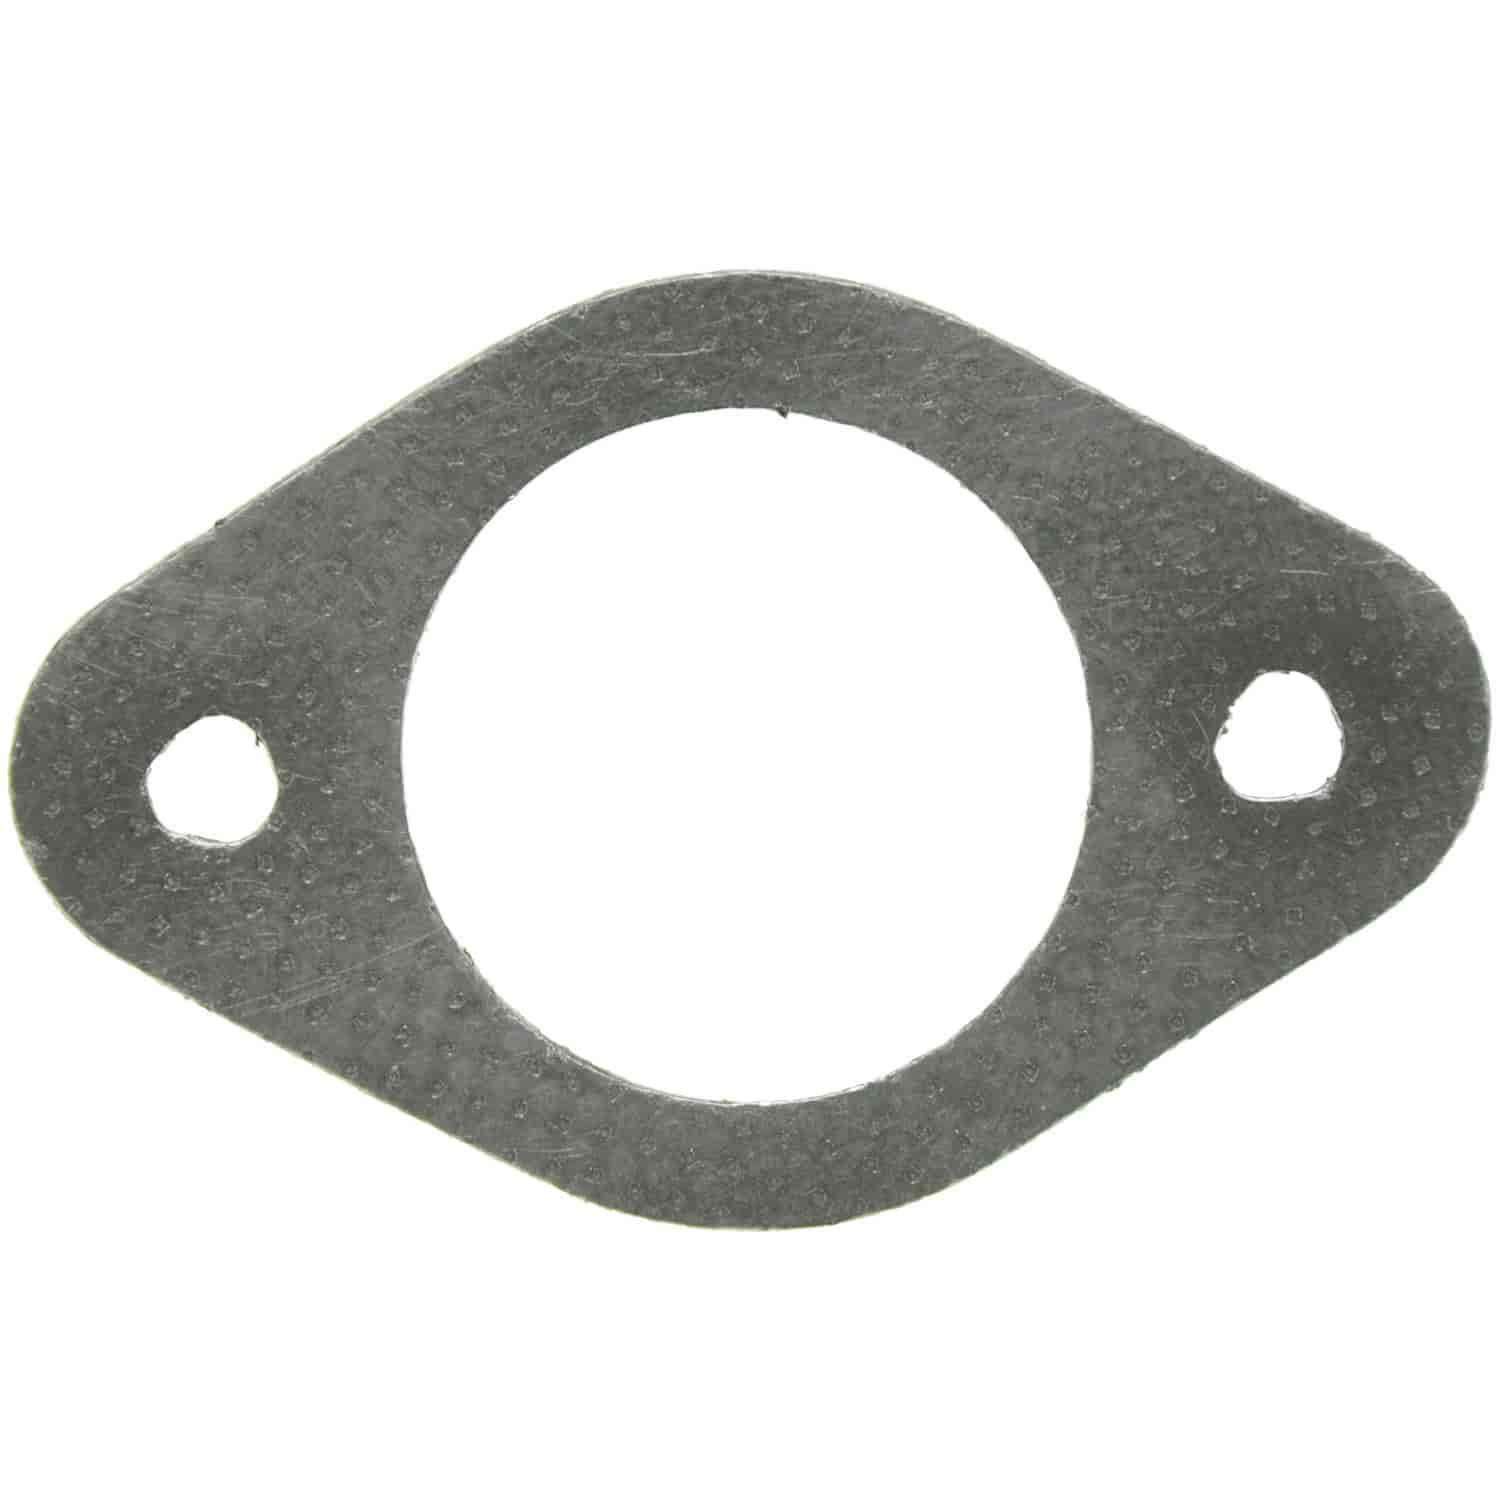 Exhaust Pipe Flange Gasket Chry-Pass Car Dodge Trk.